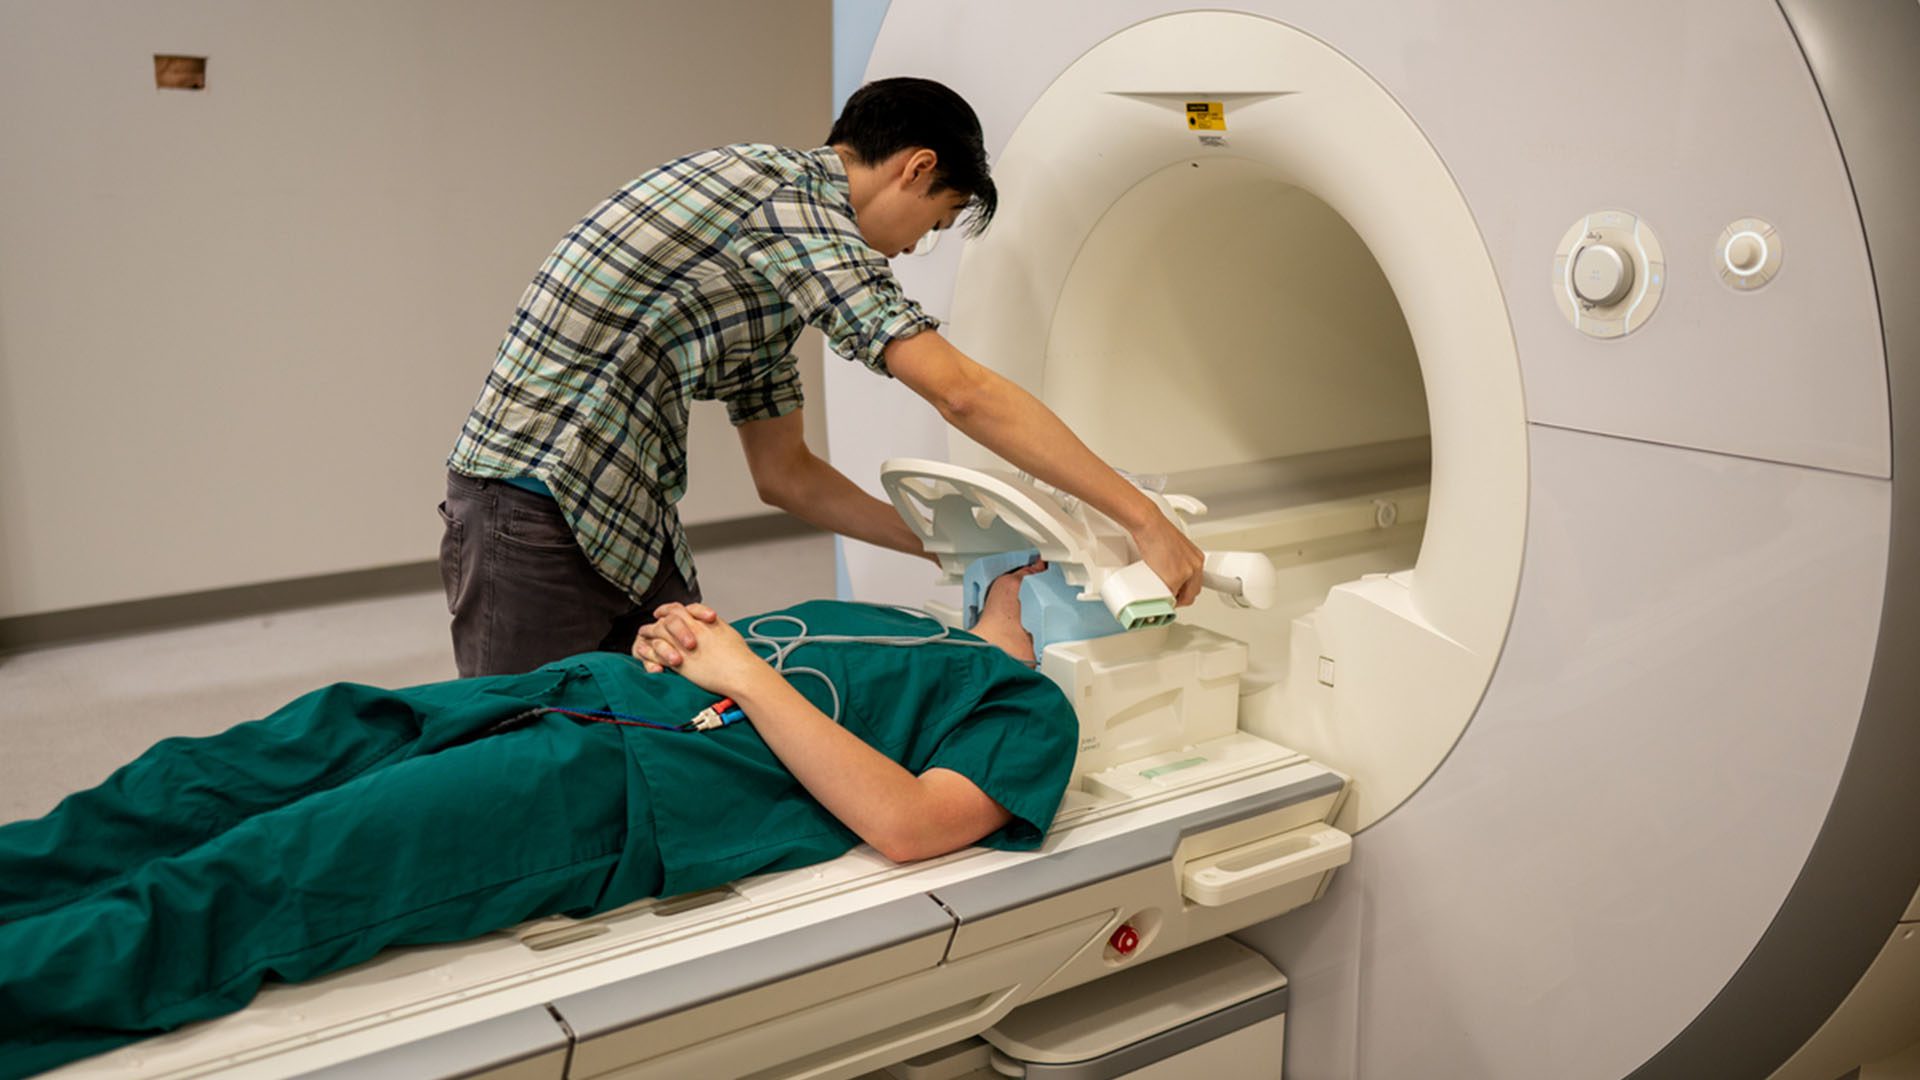 Ph.D. Student Jerry Tang prepares to collect brain activity data in the biomedical imaging center at the University of Texas at Austin